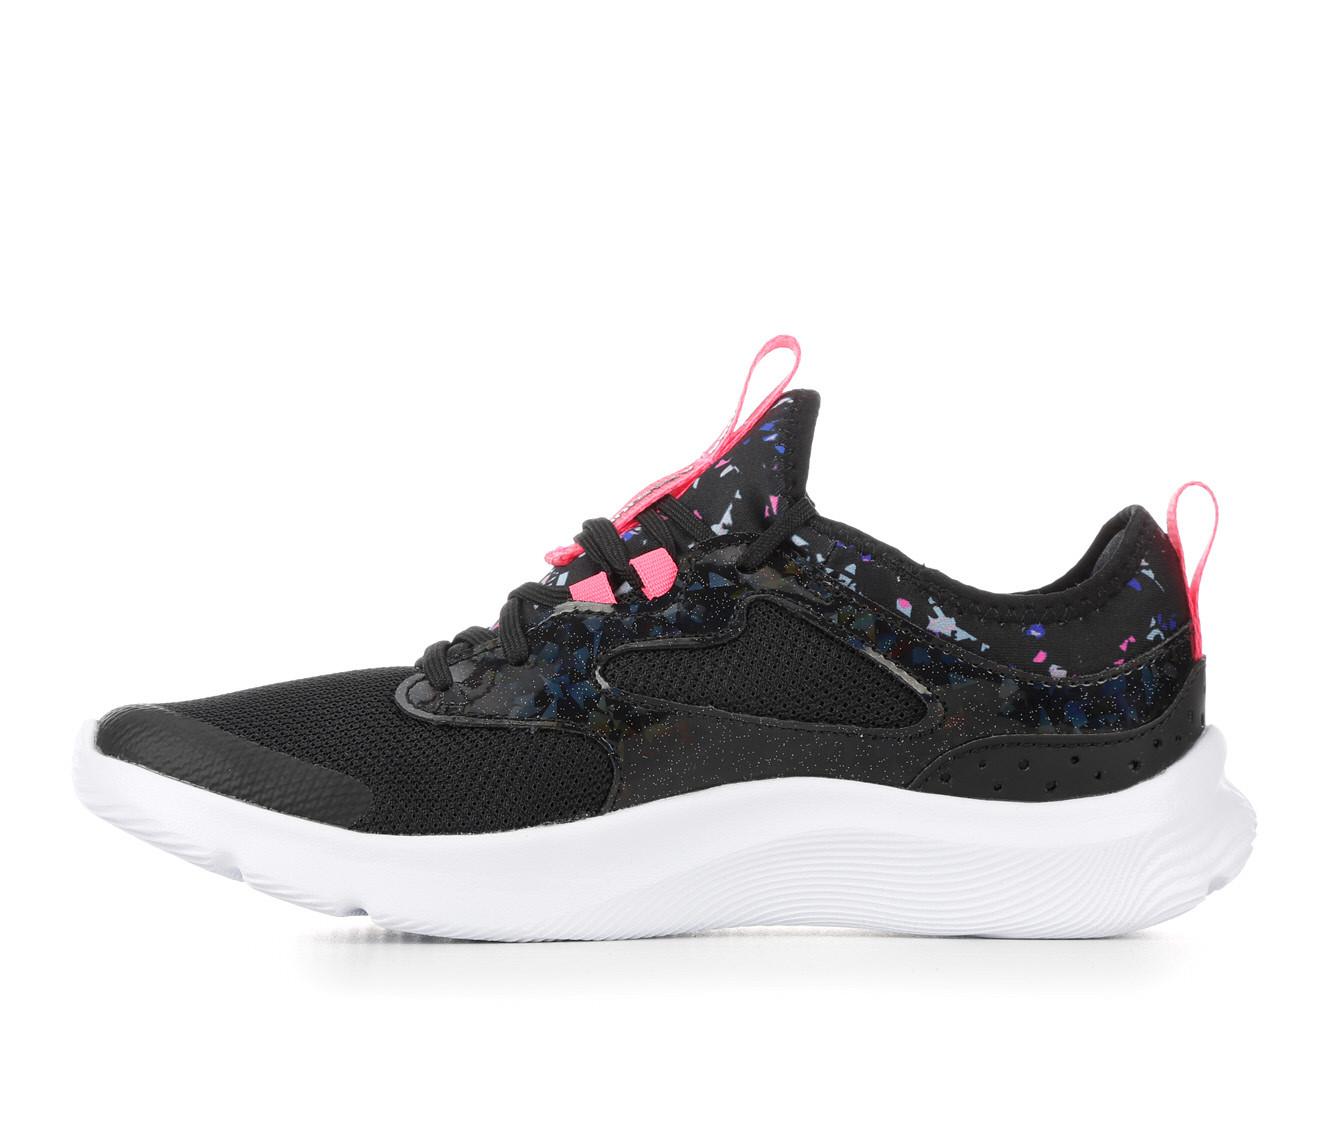 Under Armour Infinity 2 Print 3.5-7 Running Shoes